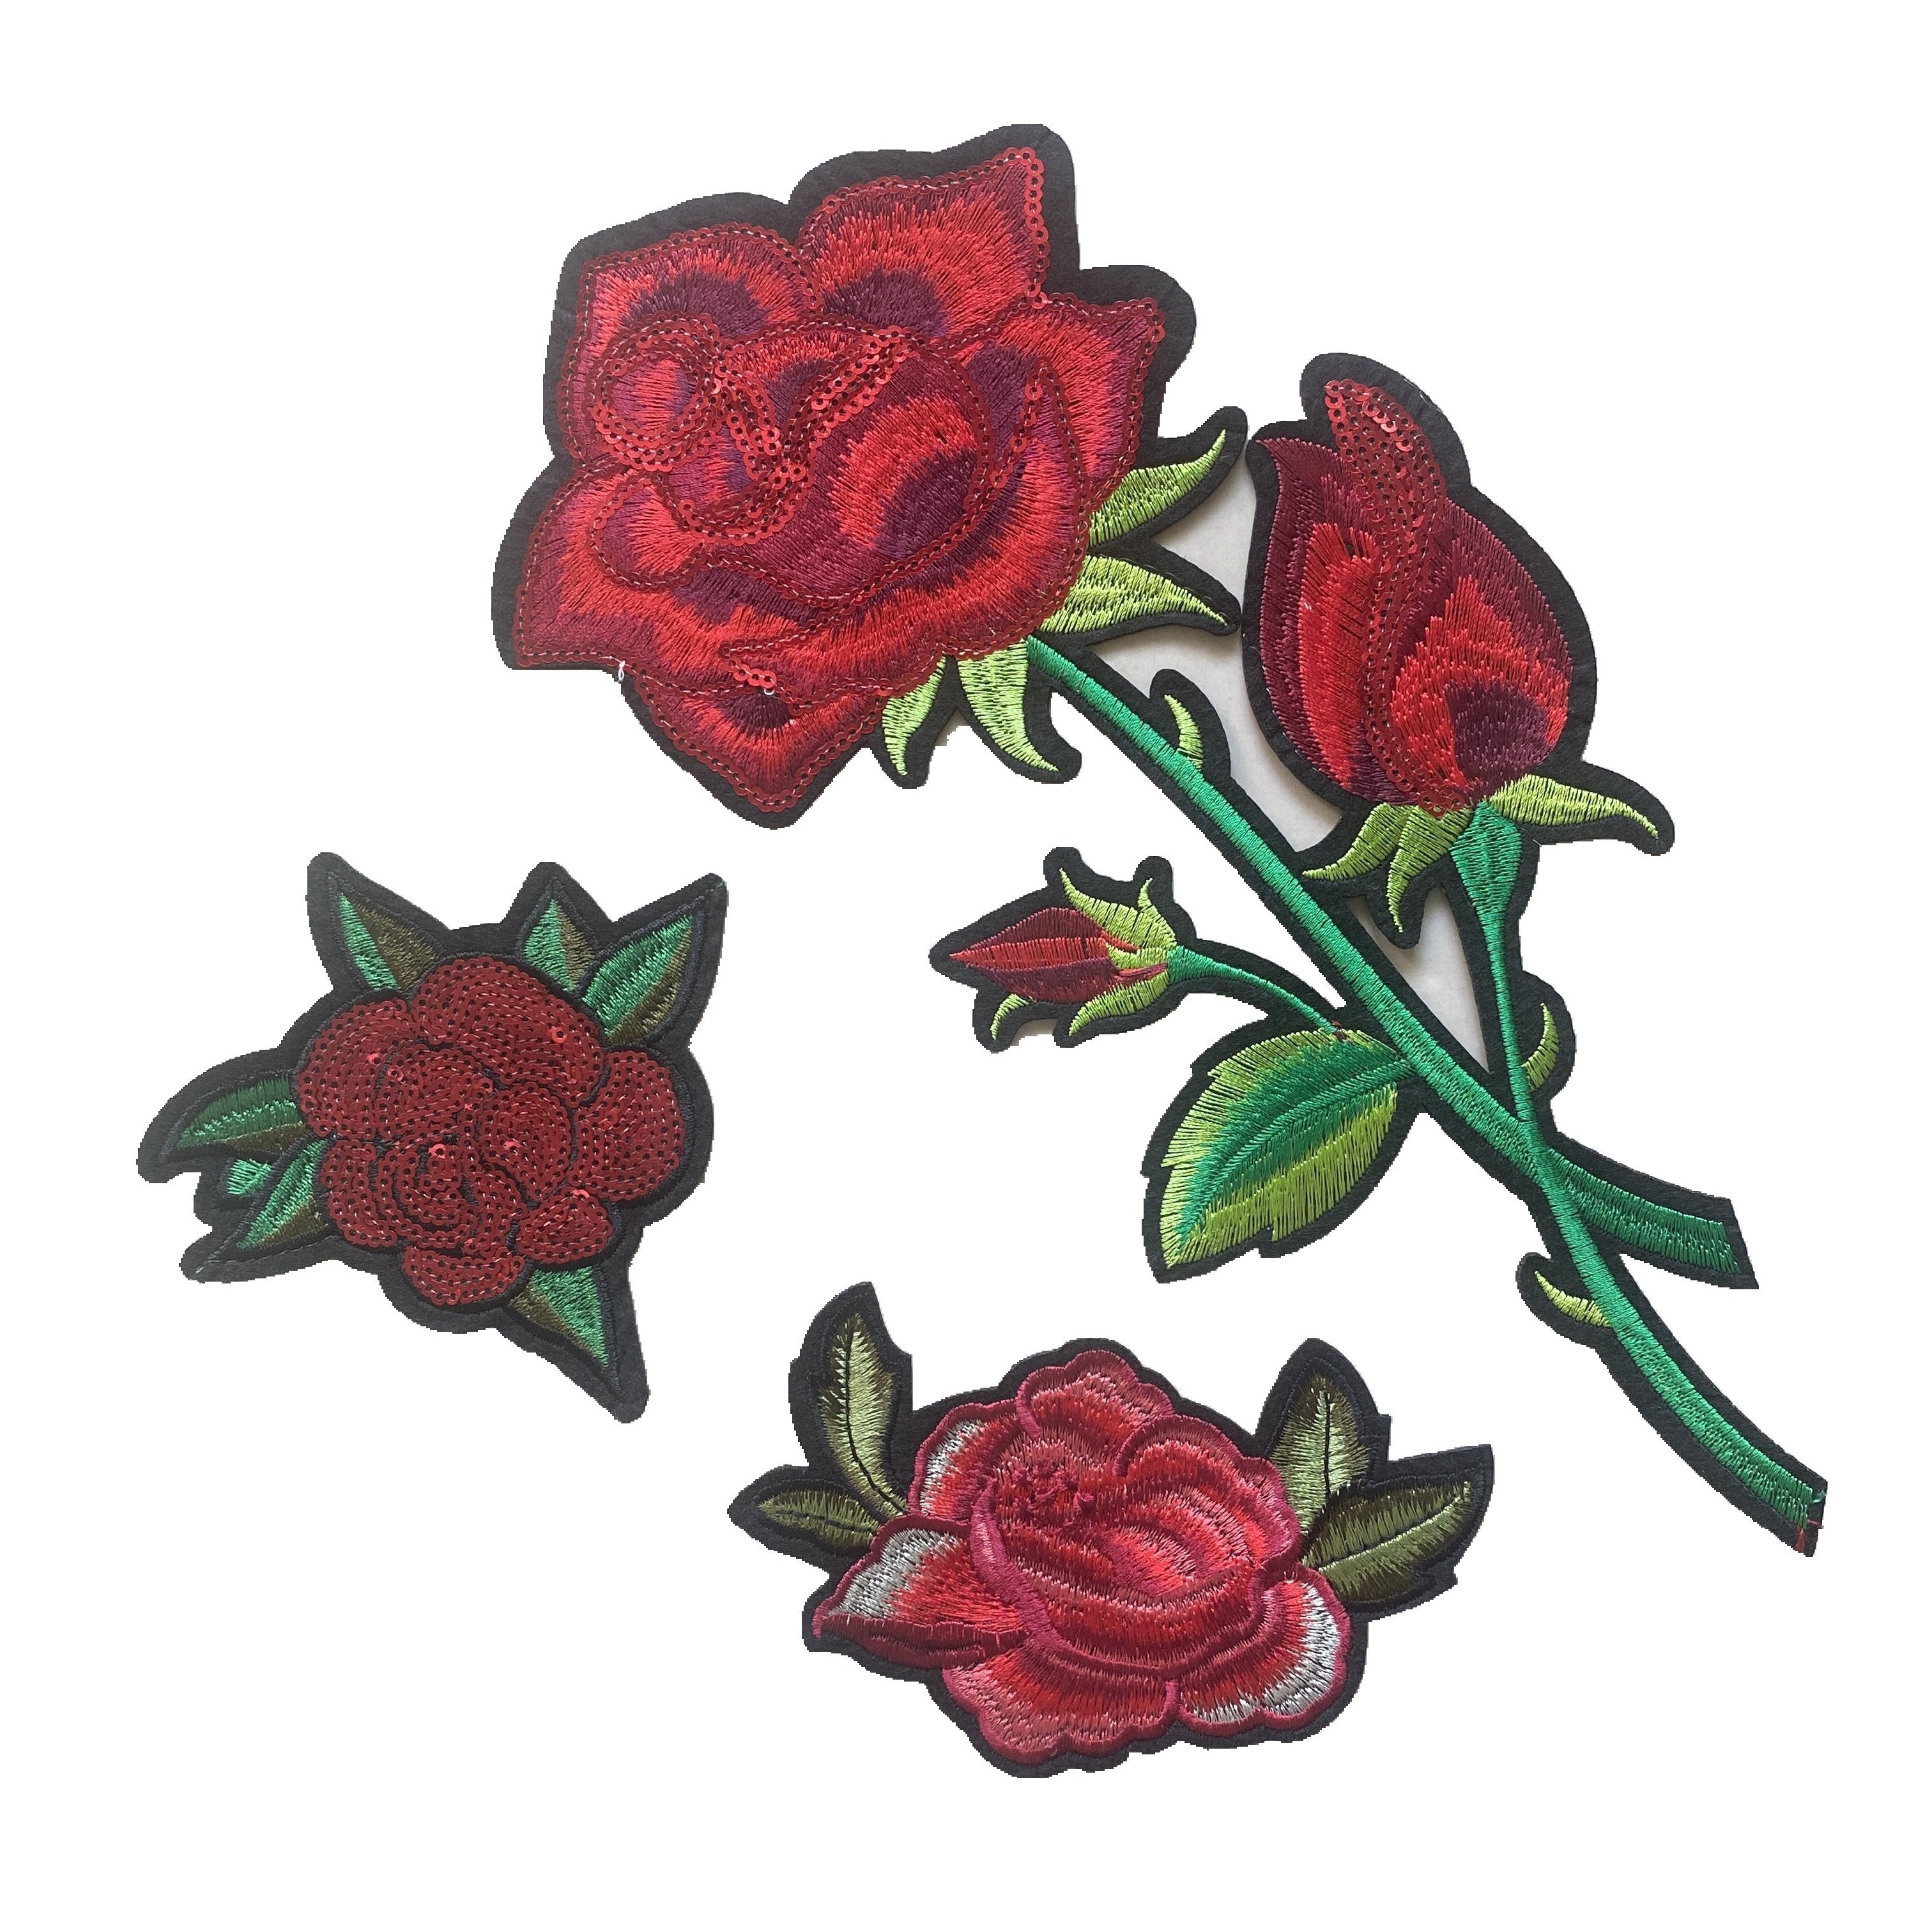 Large rose patch, Flower iron on patch, Embroidered patch for jackets